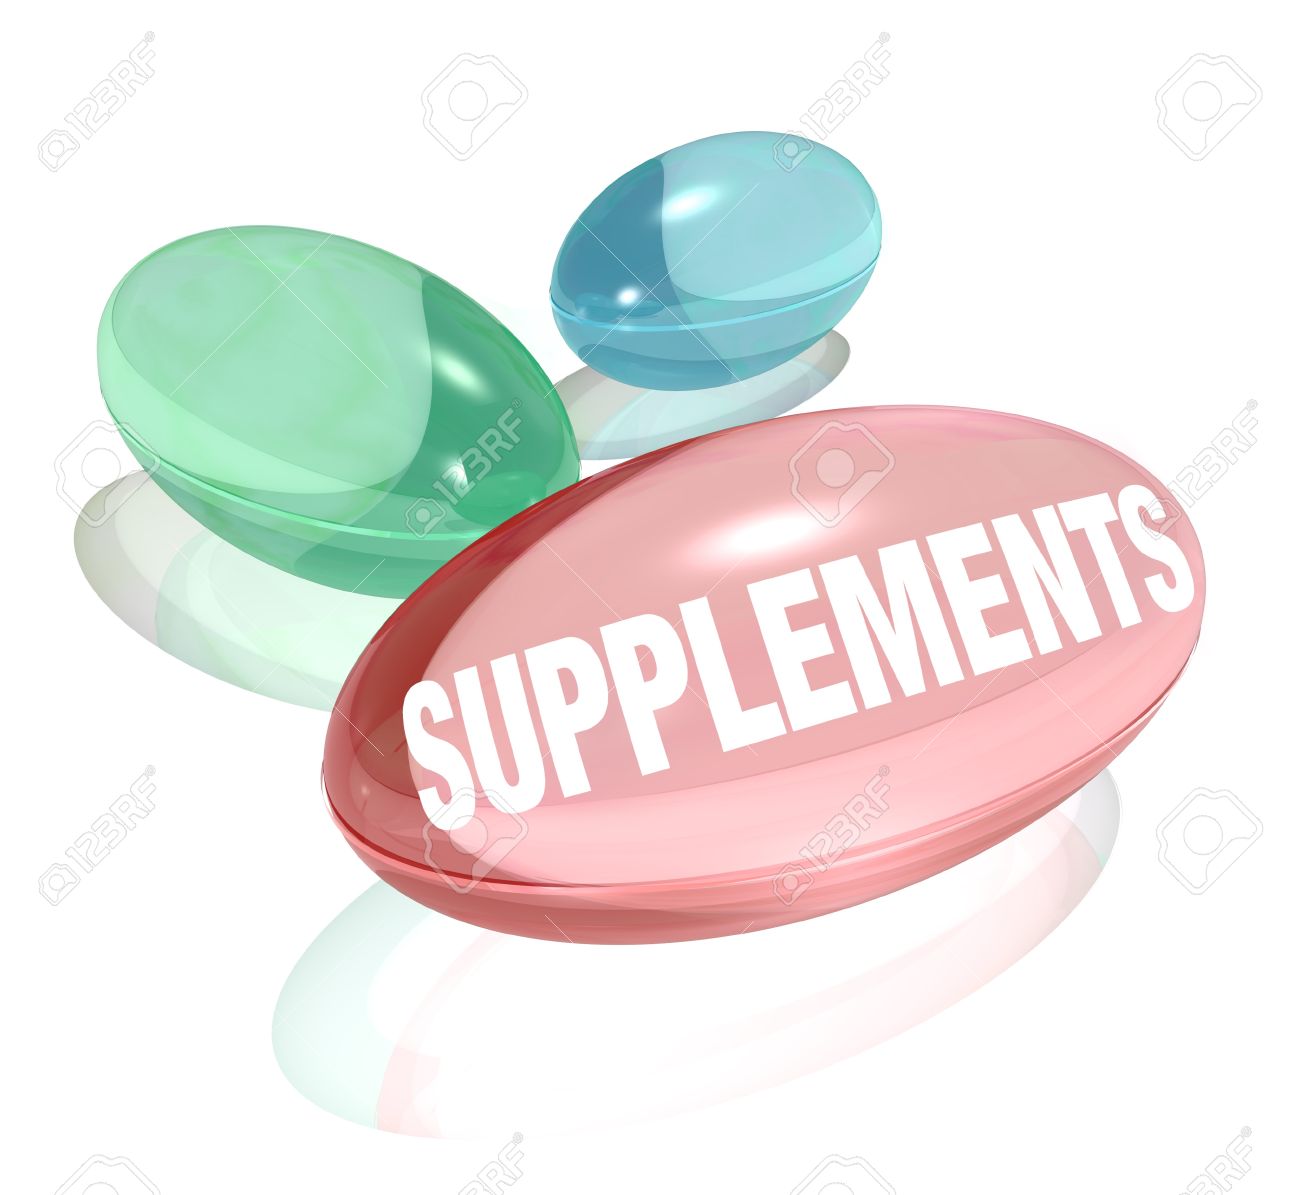 Three Colorful Dietary Supplements To Represent Vitamins Or Other.